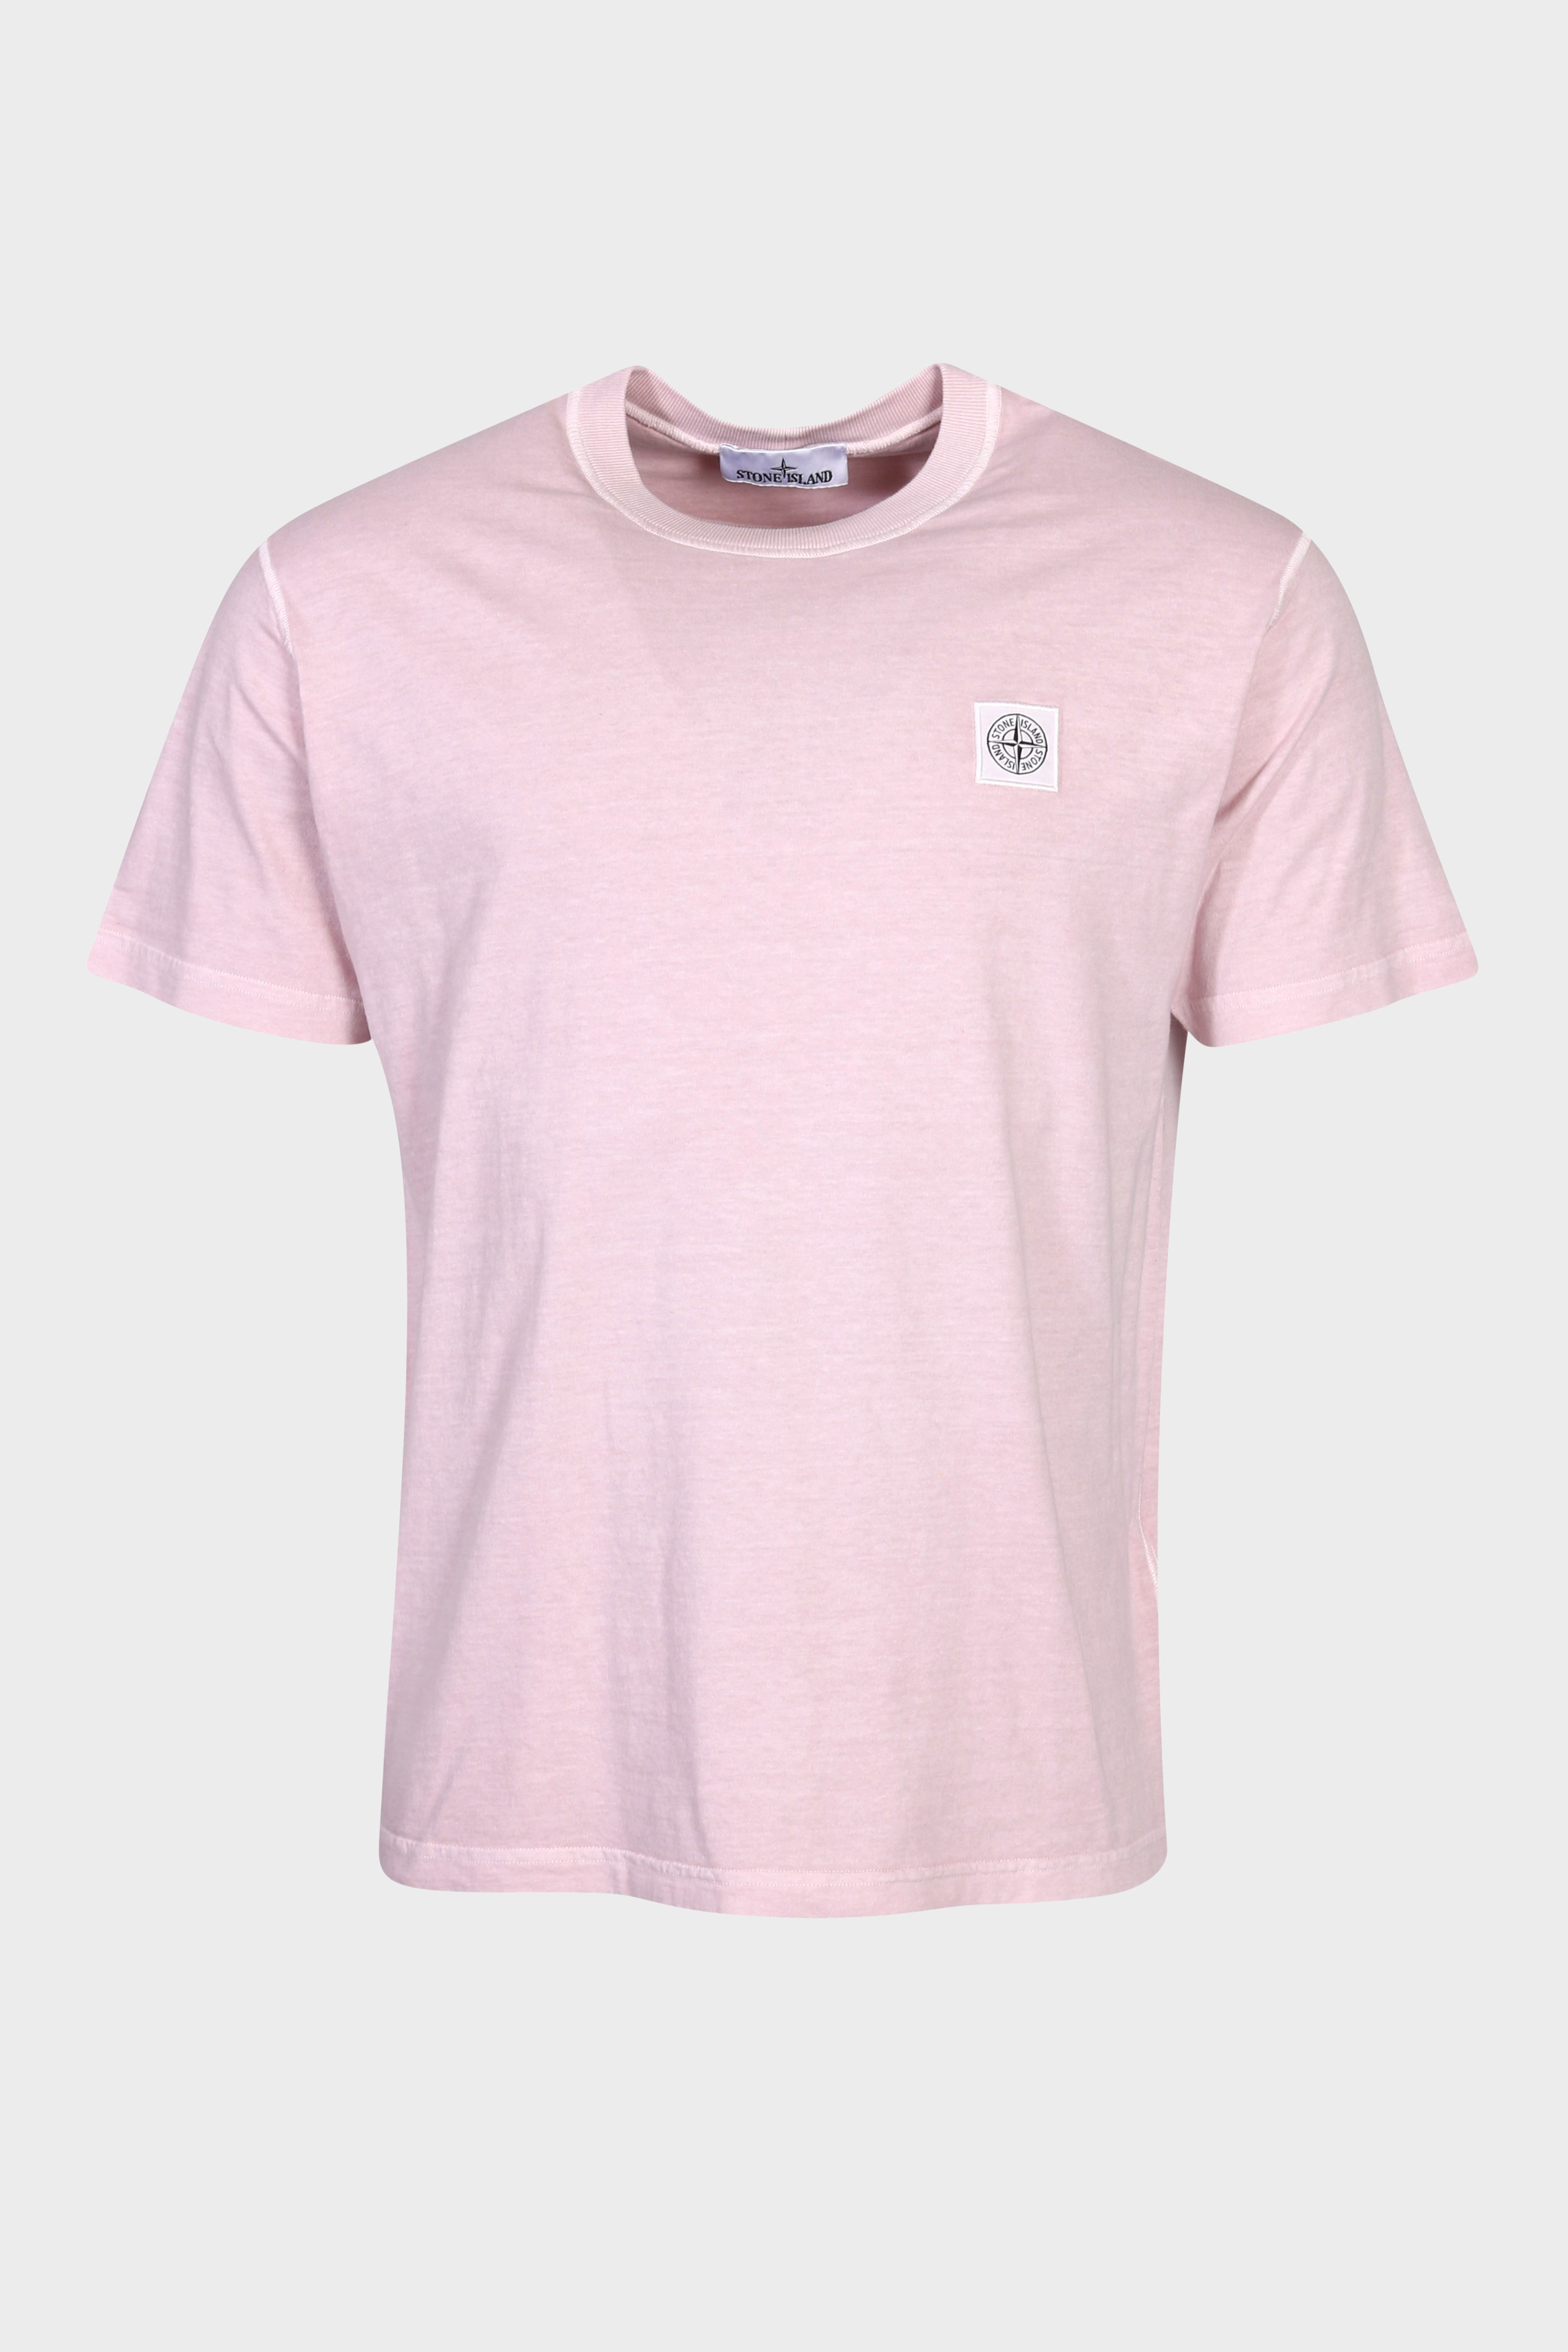 STONE ISLAND T-Shirt in Washed Light Pink 2XL